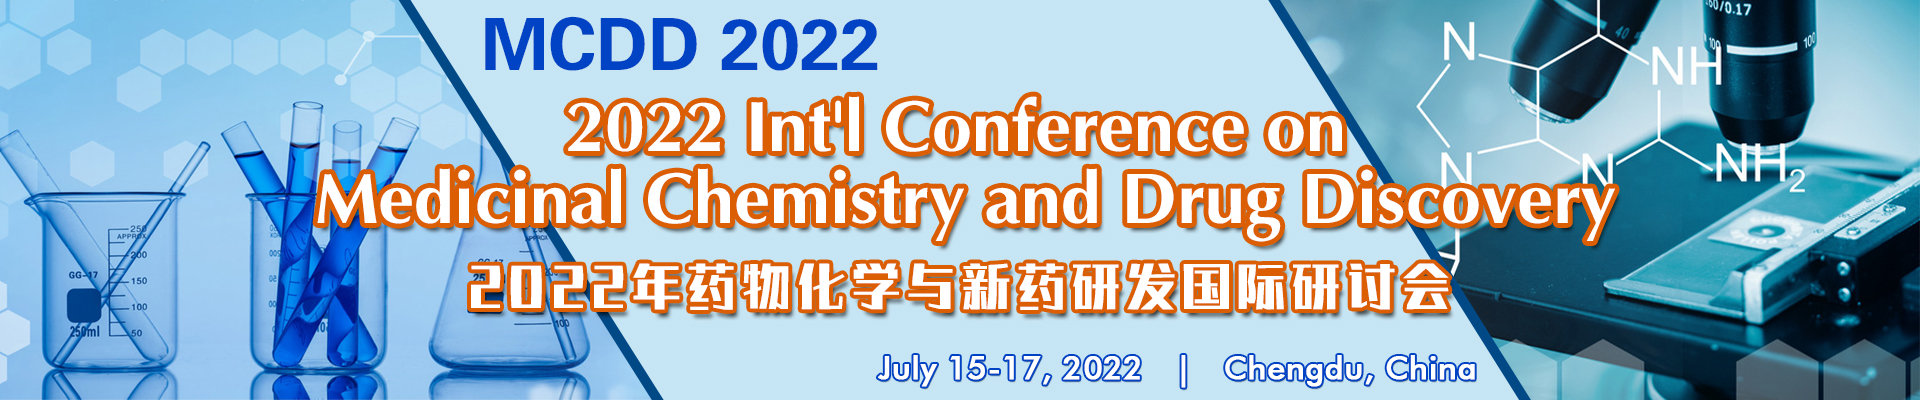 2022 International Conference on Medicinal Chemistry and Drug Discovery (MCDD 2022)